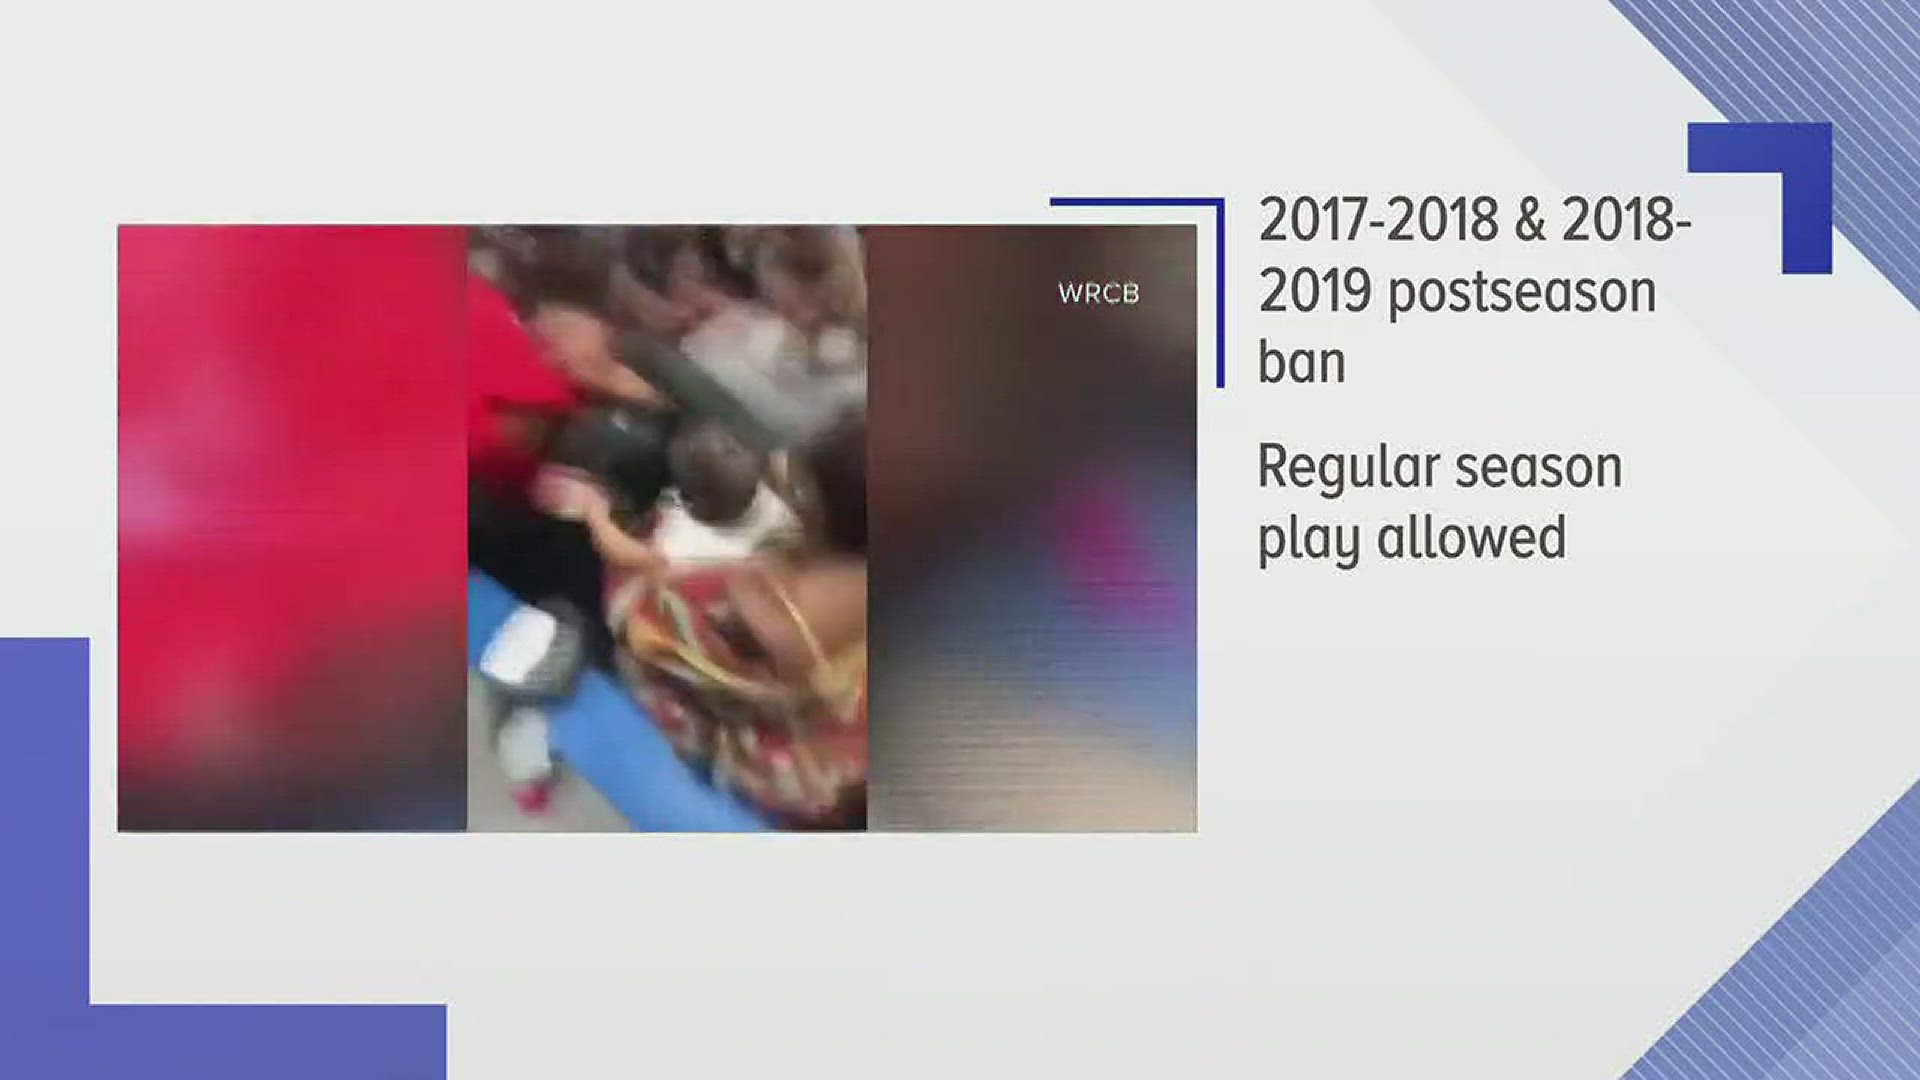 Feb. 2, 2018: The Austin-East high school basketball team has been banned from the post season for two years after a fight during one of the team's games.